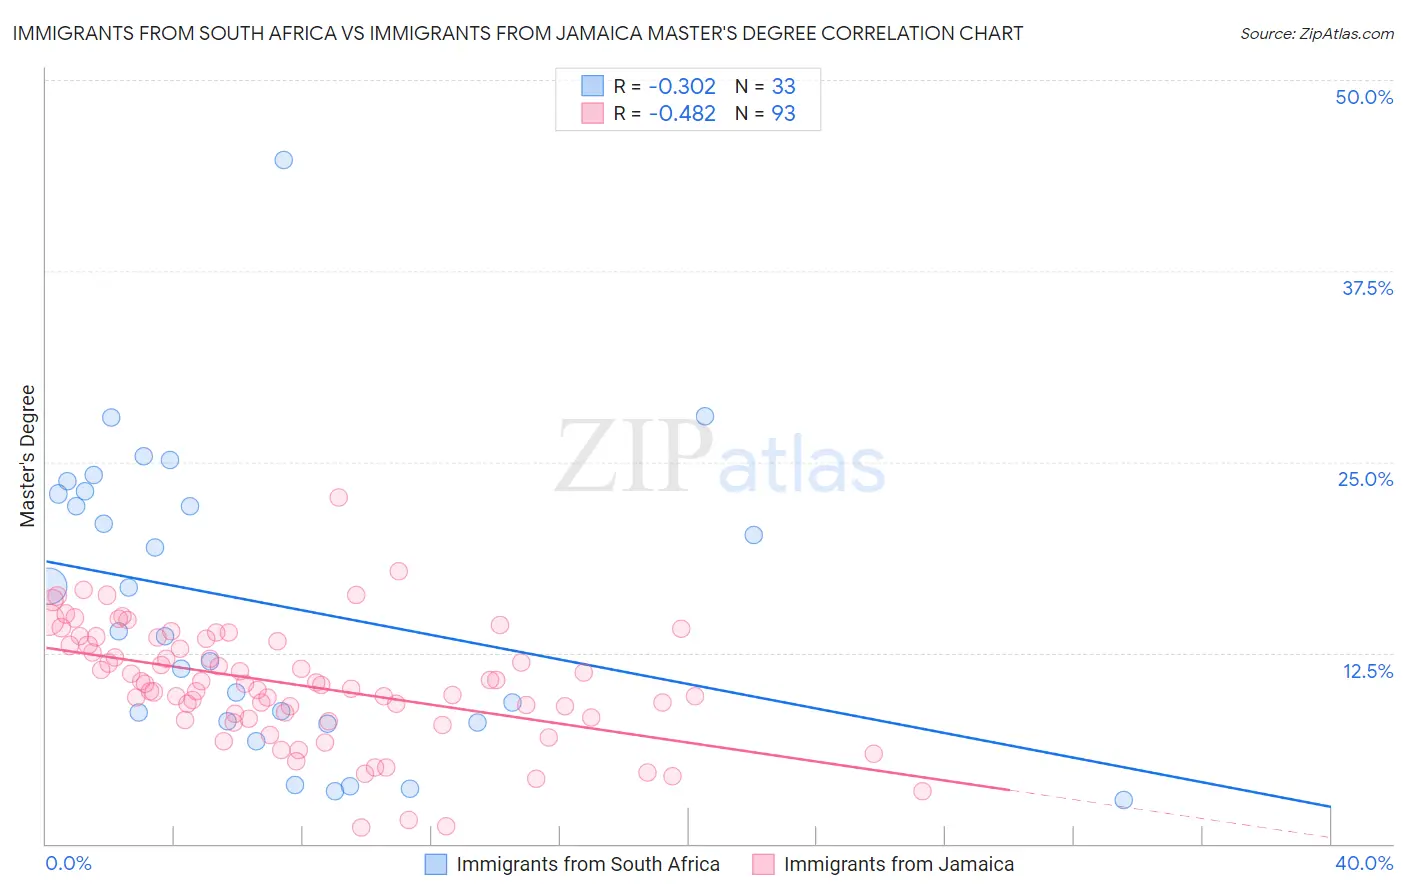 Immigrants from South Africa vs Immigrants from Jamaica Master's Degree